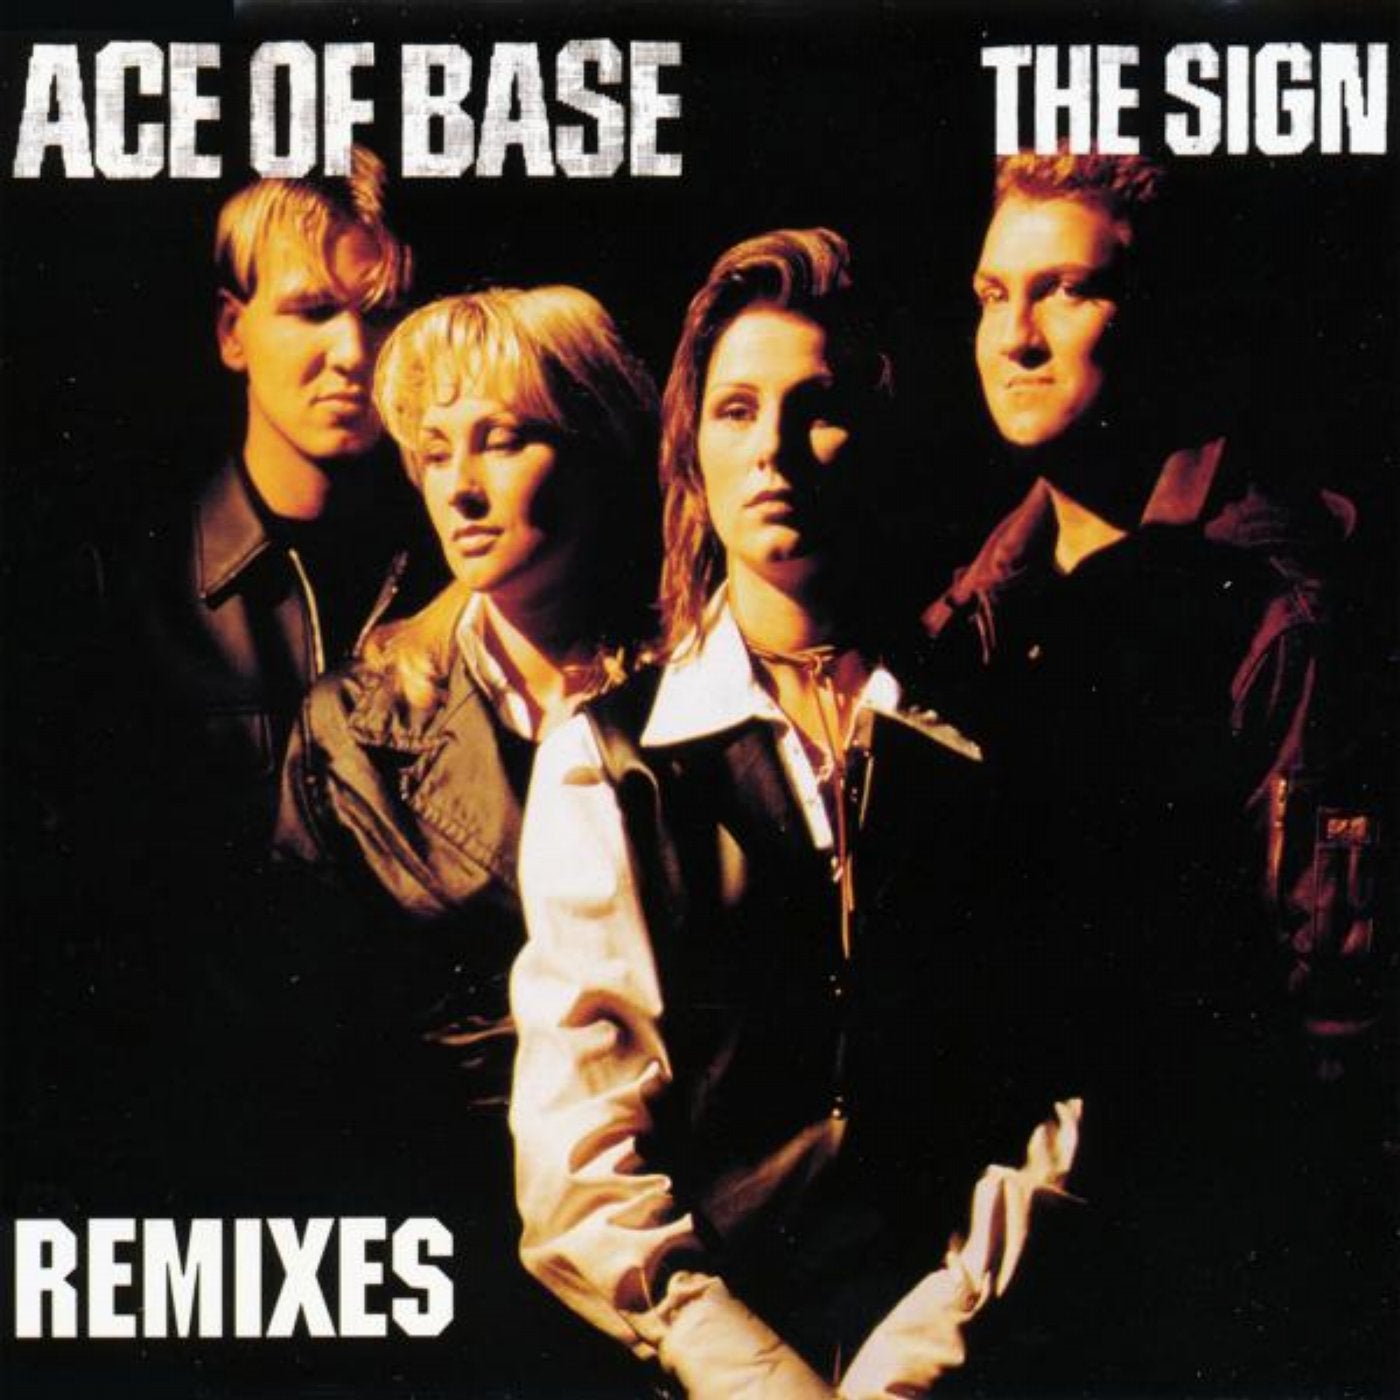 Mandee feat ace of base. Ace of Base 1992. Ace of Base 1993. Ace of Base album Cover. Ace of Base the sign 1993.